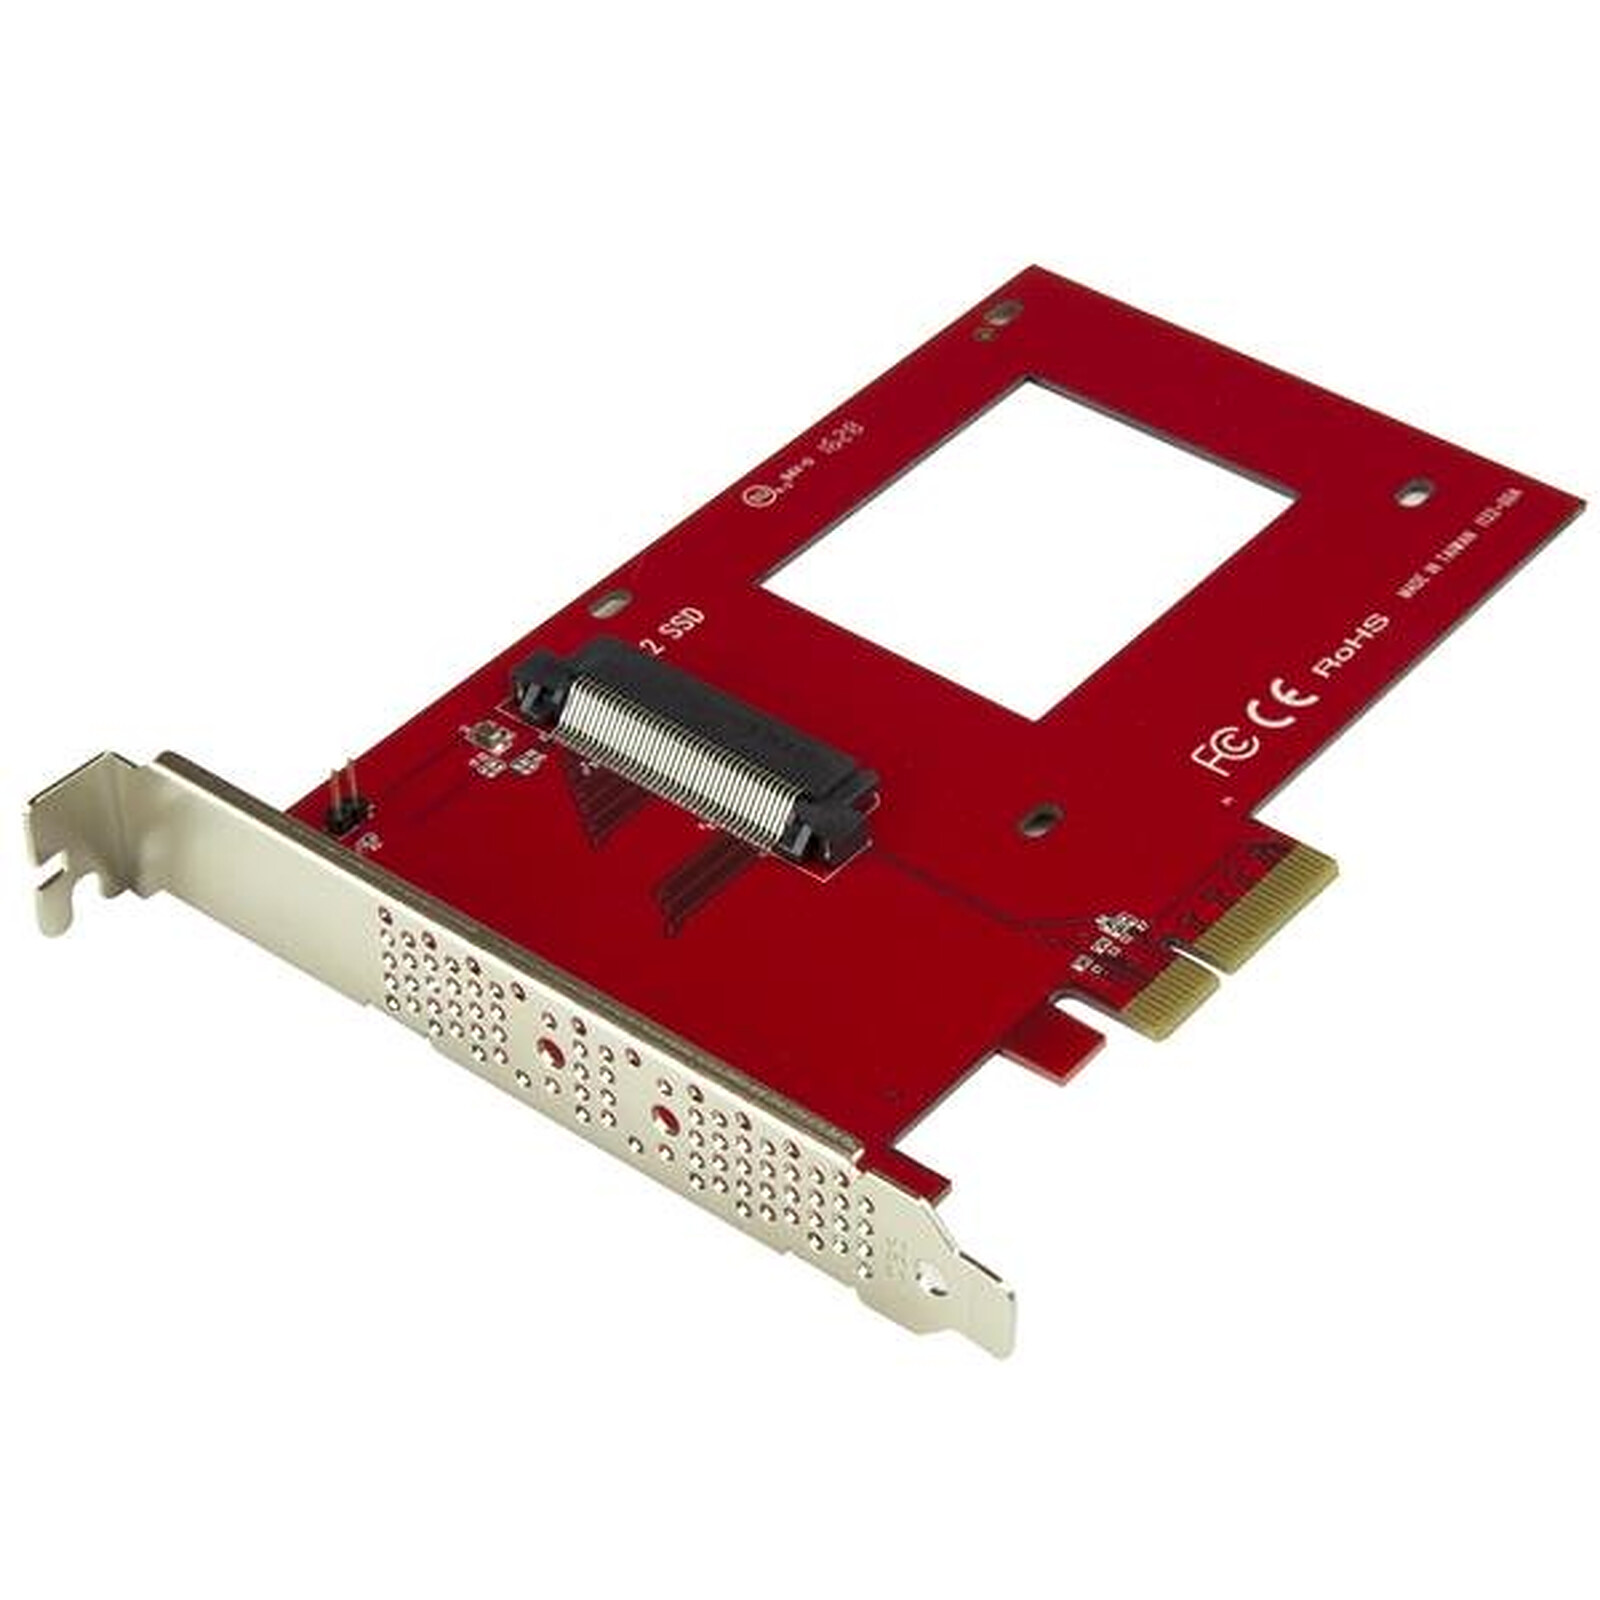   to PCIe Controller Card for  NVMe SSD - SFF-8639 - PCI  Express  x4 - Controller card  on LDLC